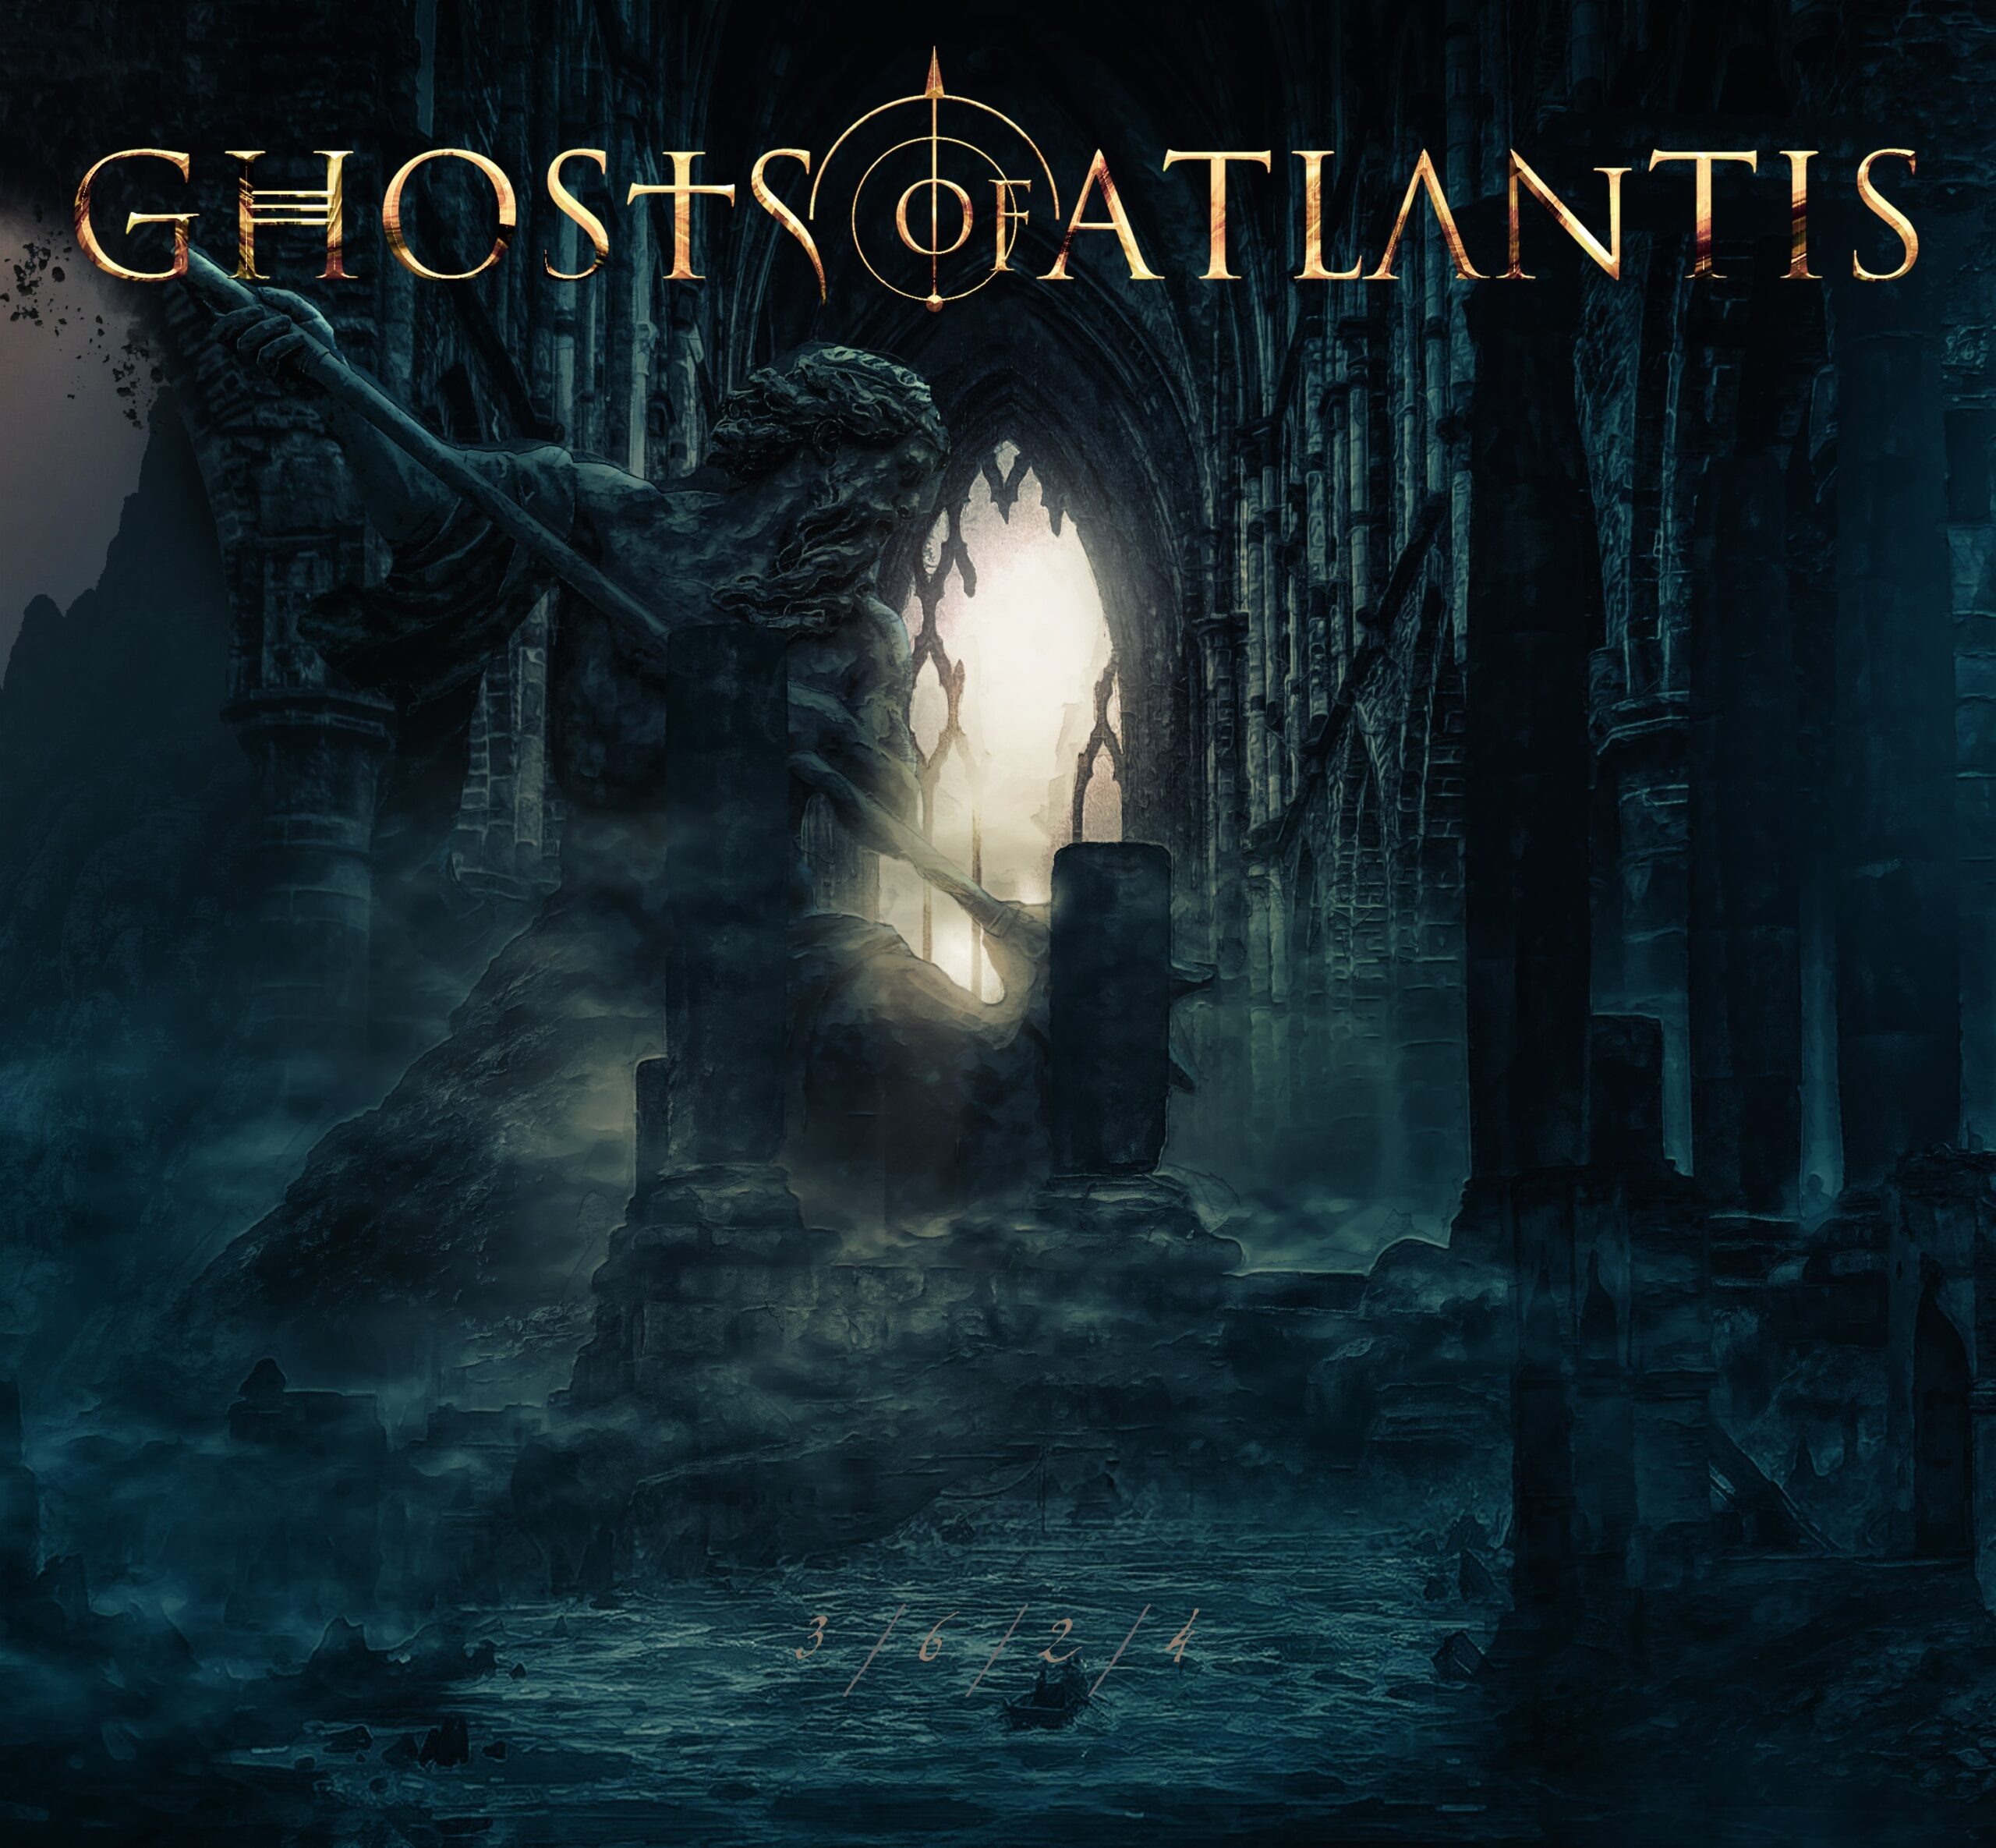 Ghosts of Atlantis – 3.6.2.4 Review